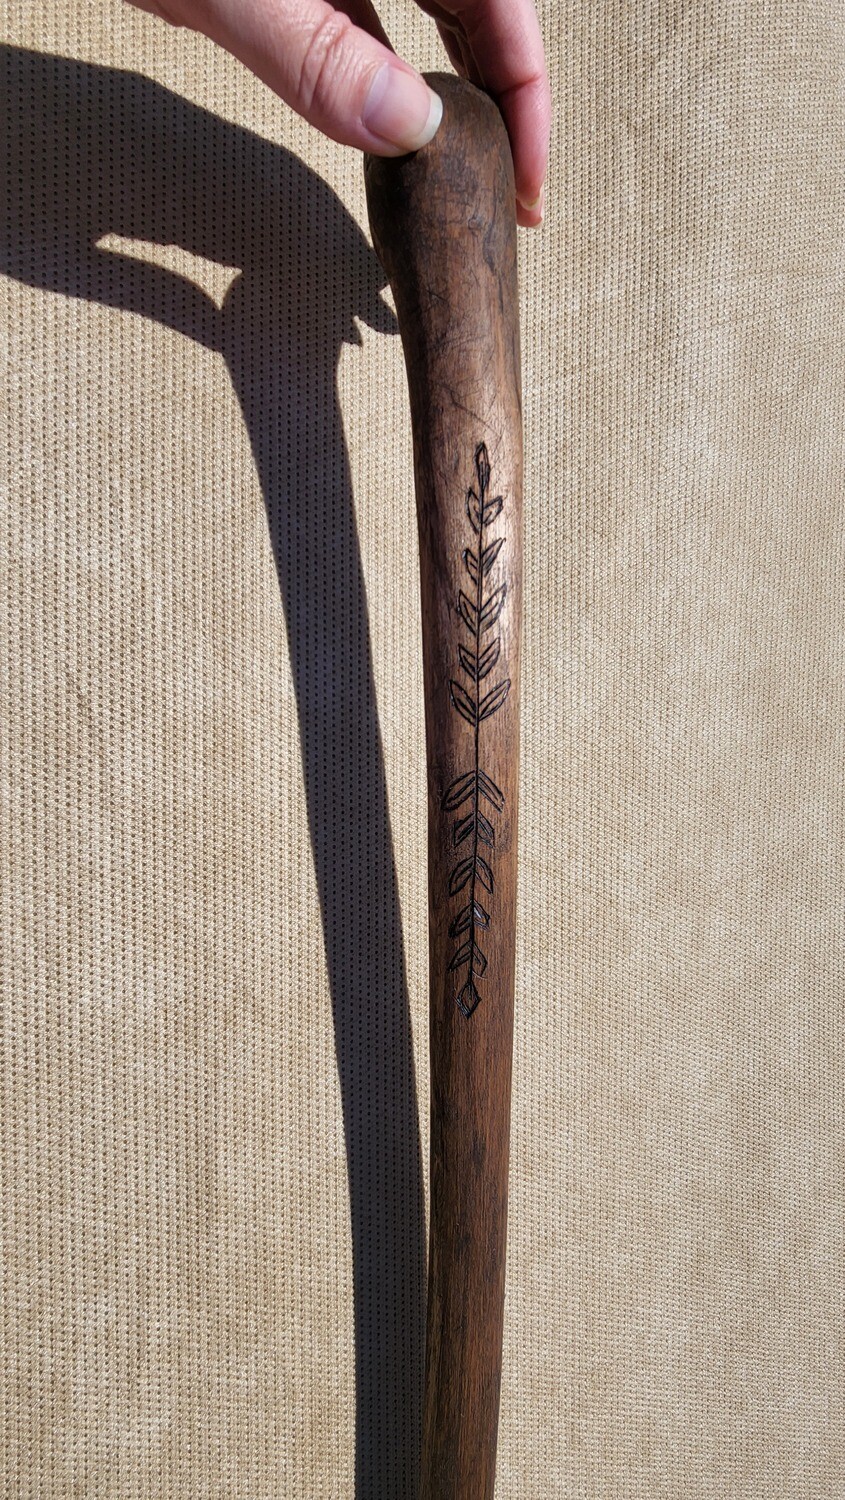 Wooden Walking Stick With Burned Art